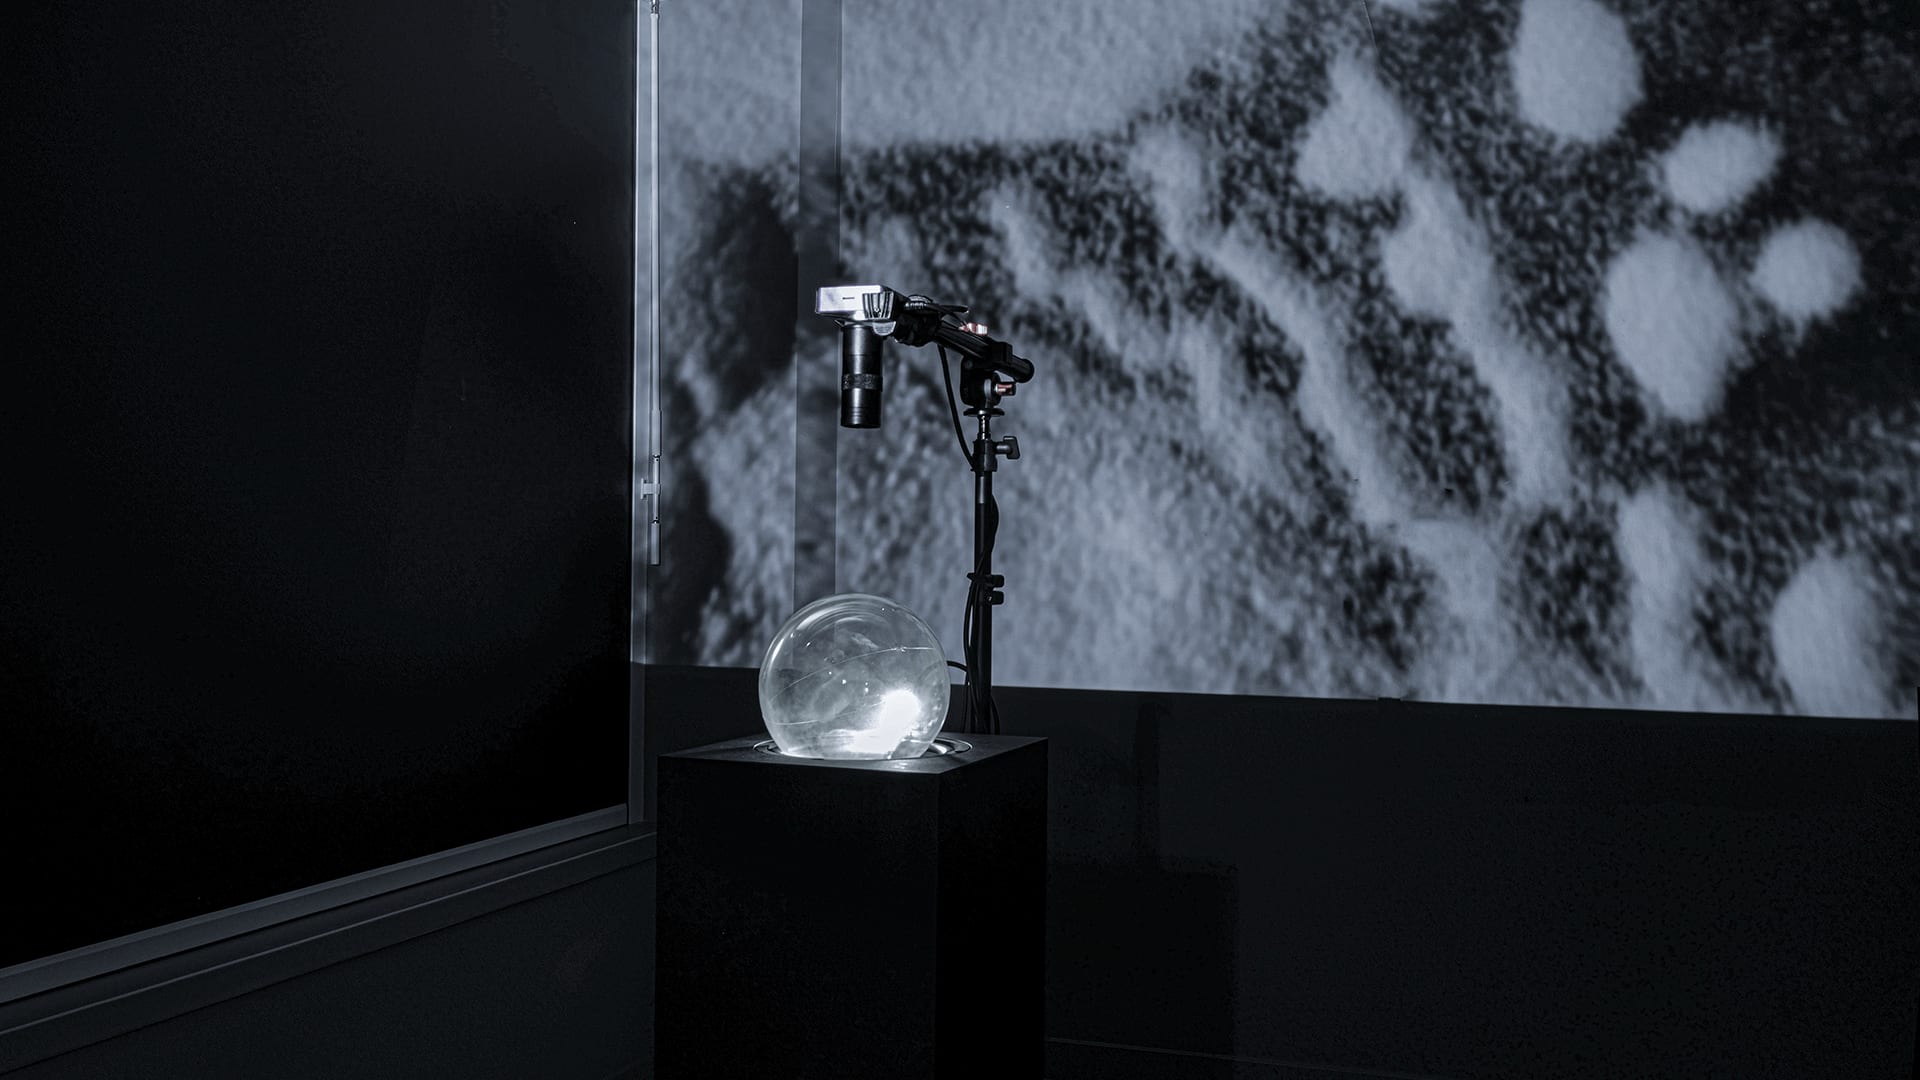 The photo depicts an art installation composed of a black box, a balloon, a camera, and a projection